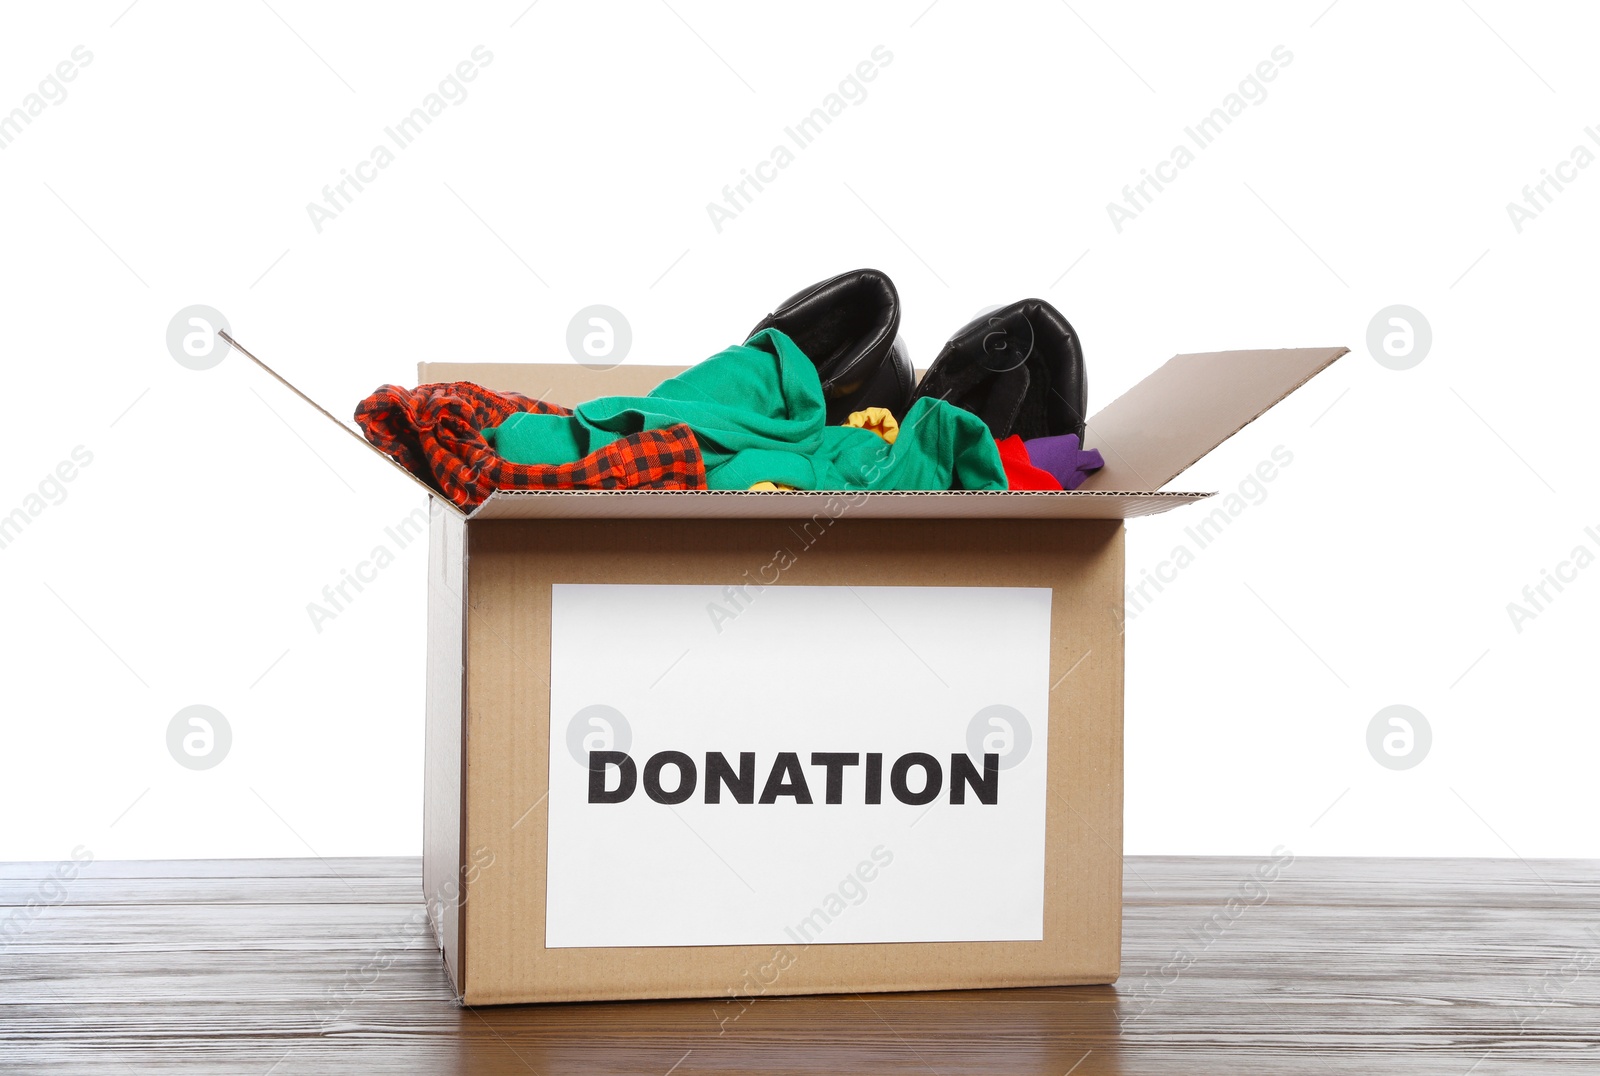 Photo of Donation box with clothes and shoes on table against white background